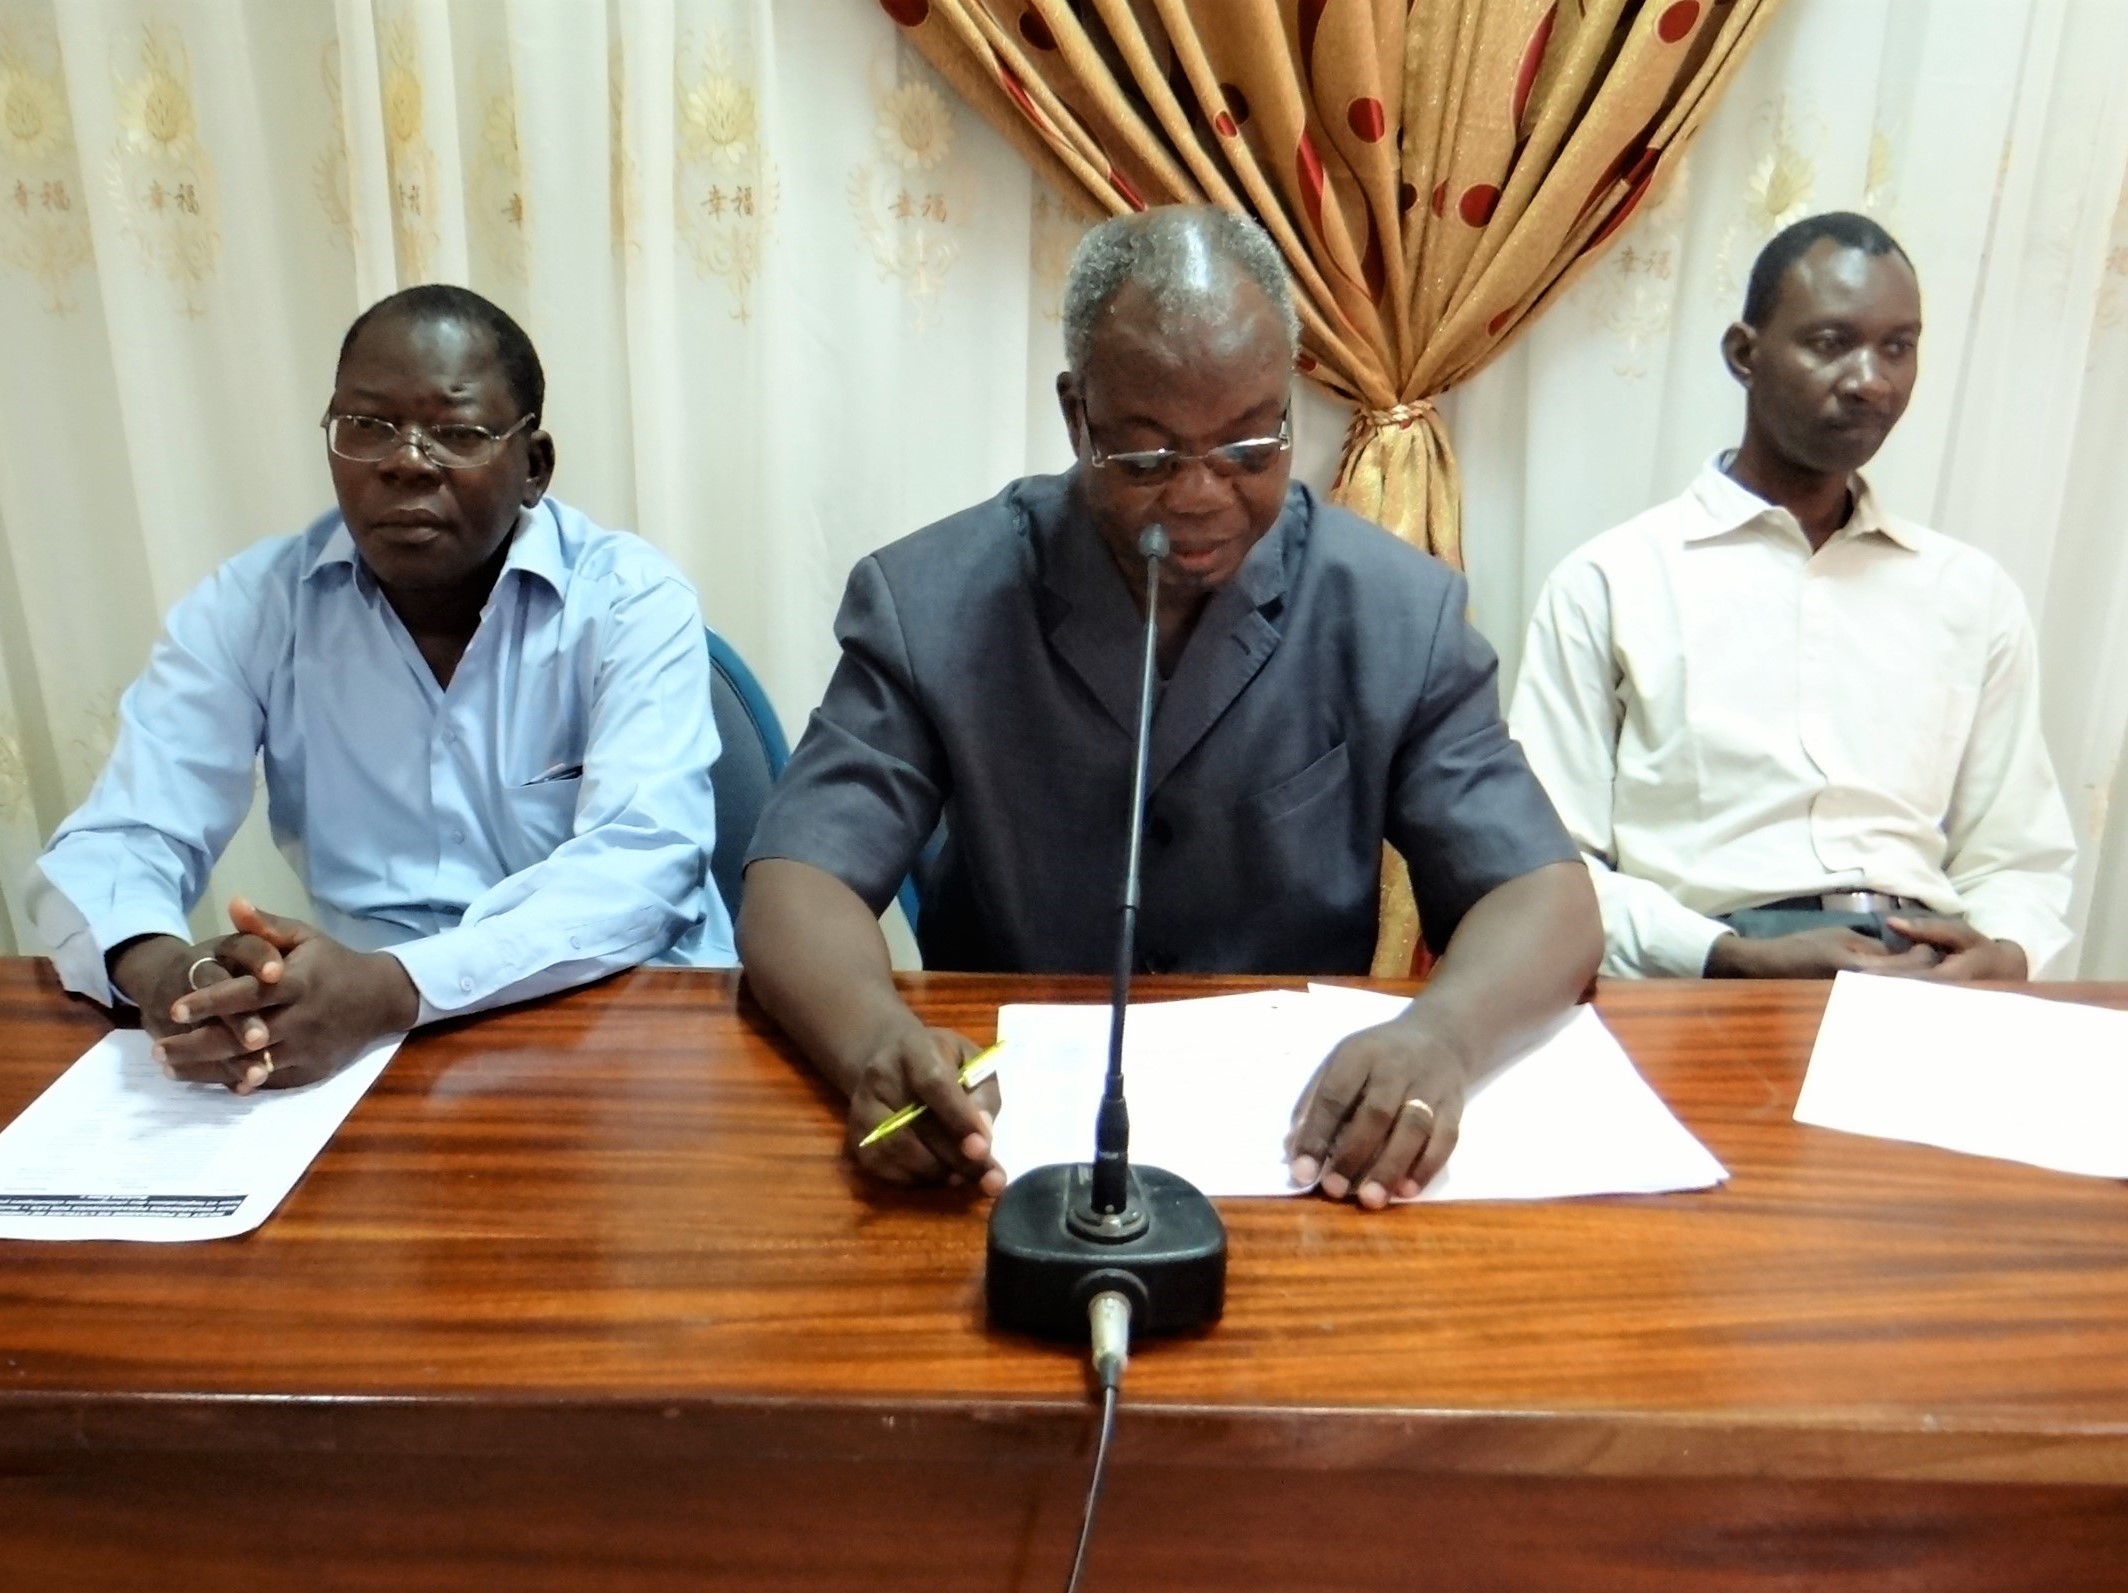 From left to right, the representatives of the Director of Environmental Education, Brahima Belem, the Permanent Secretary of the National Council for Sustainable Development, Mr. Goudouma Zigani, Coordinator UN CC:Learn Burkina Mahamoudou Tiendrebeogo